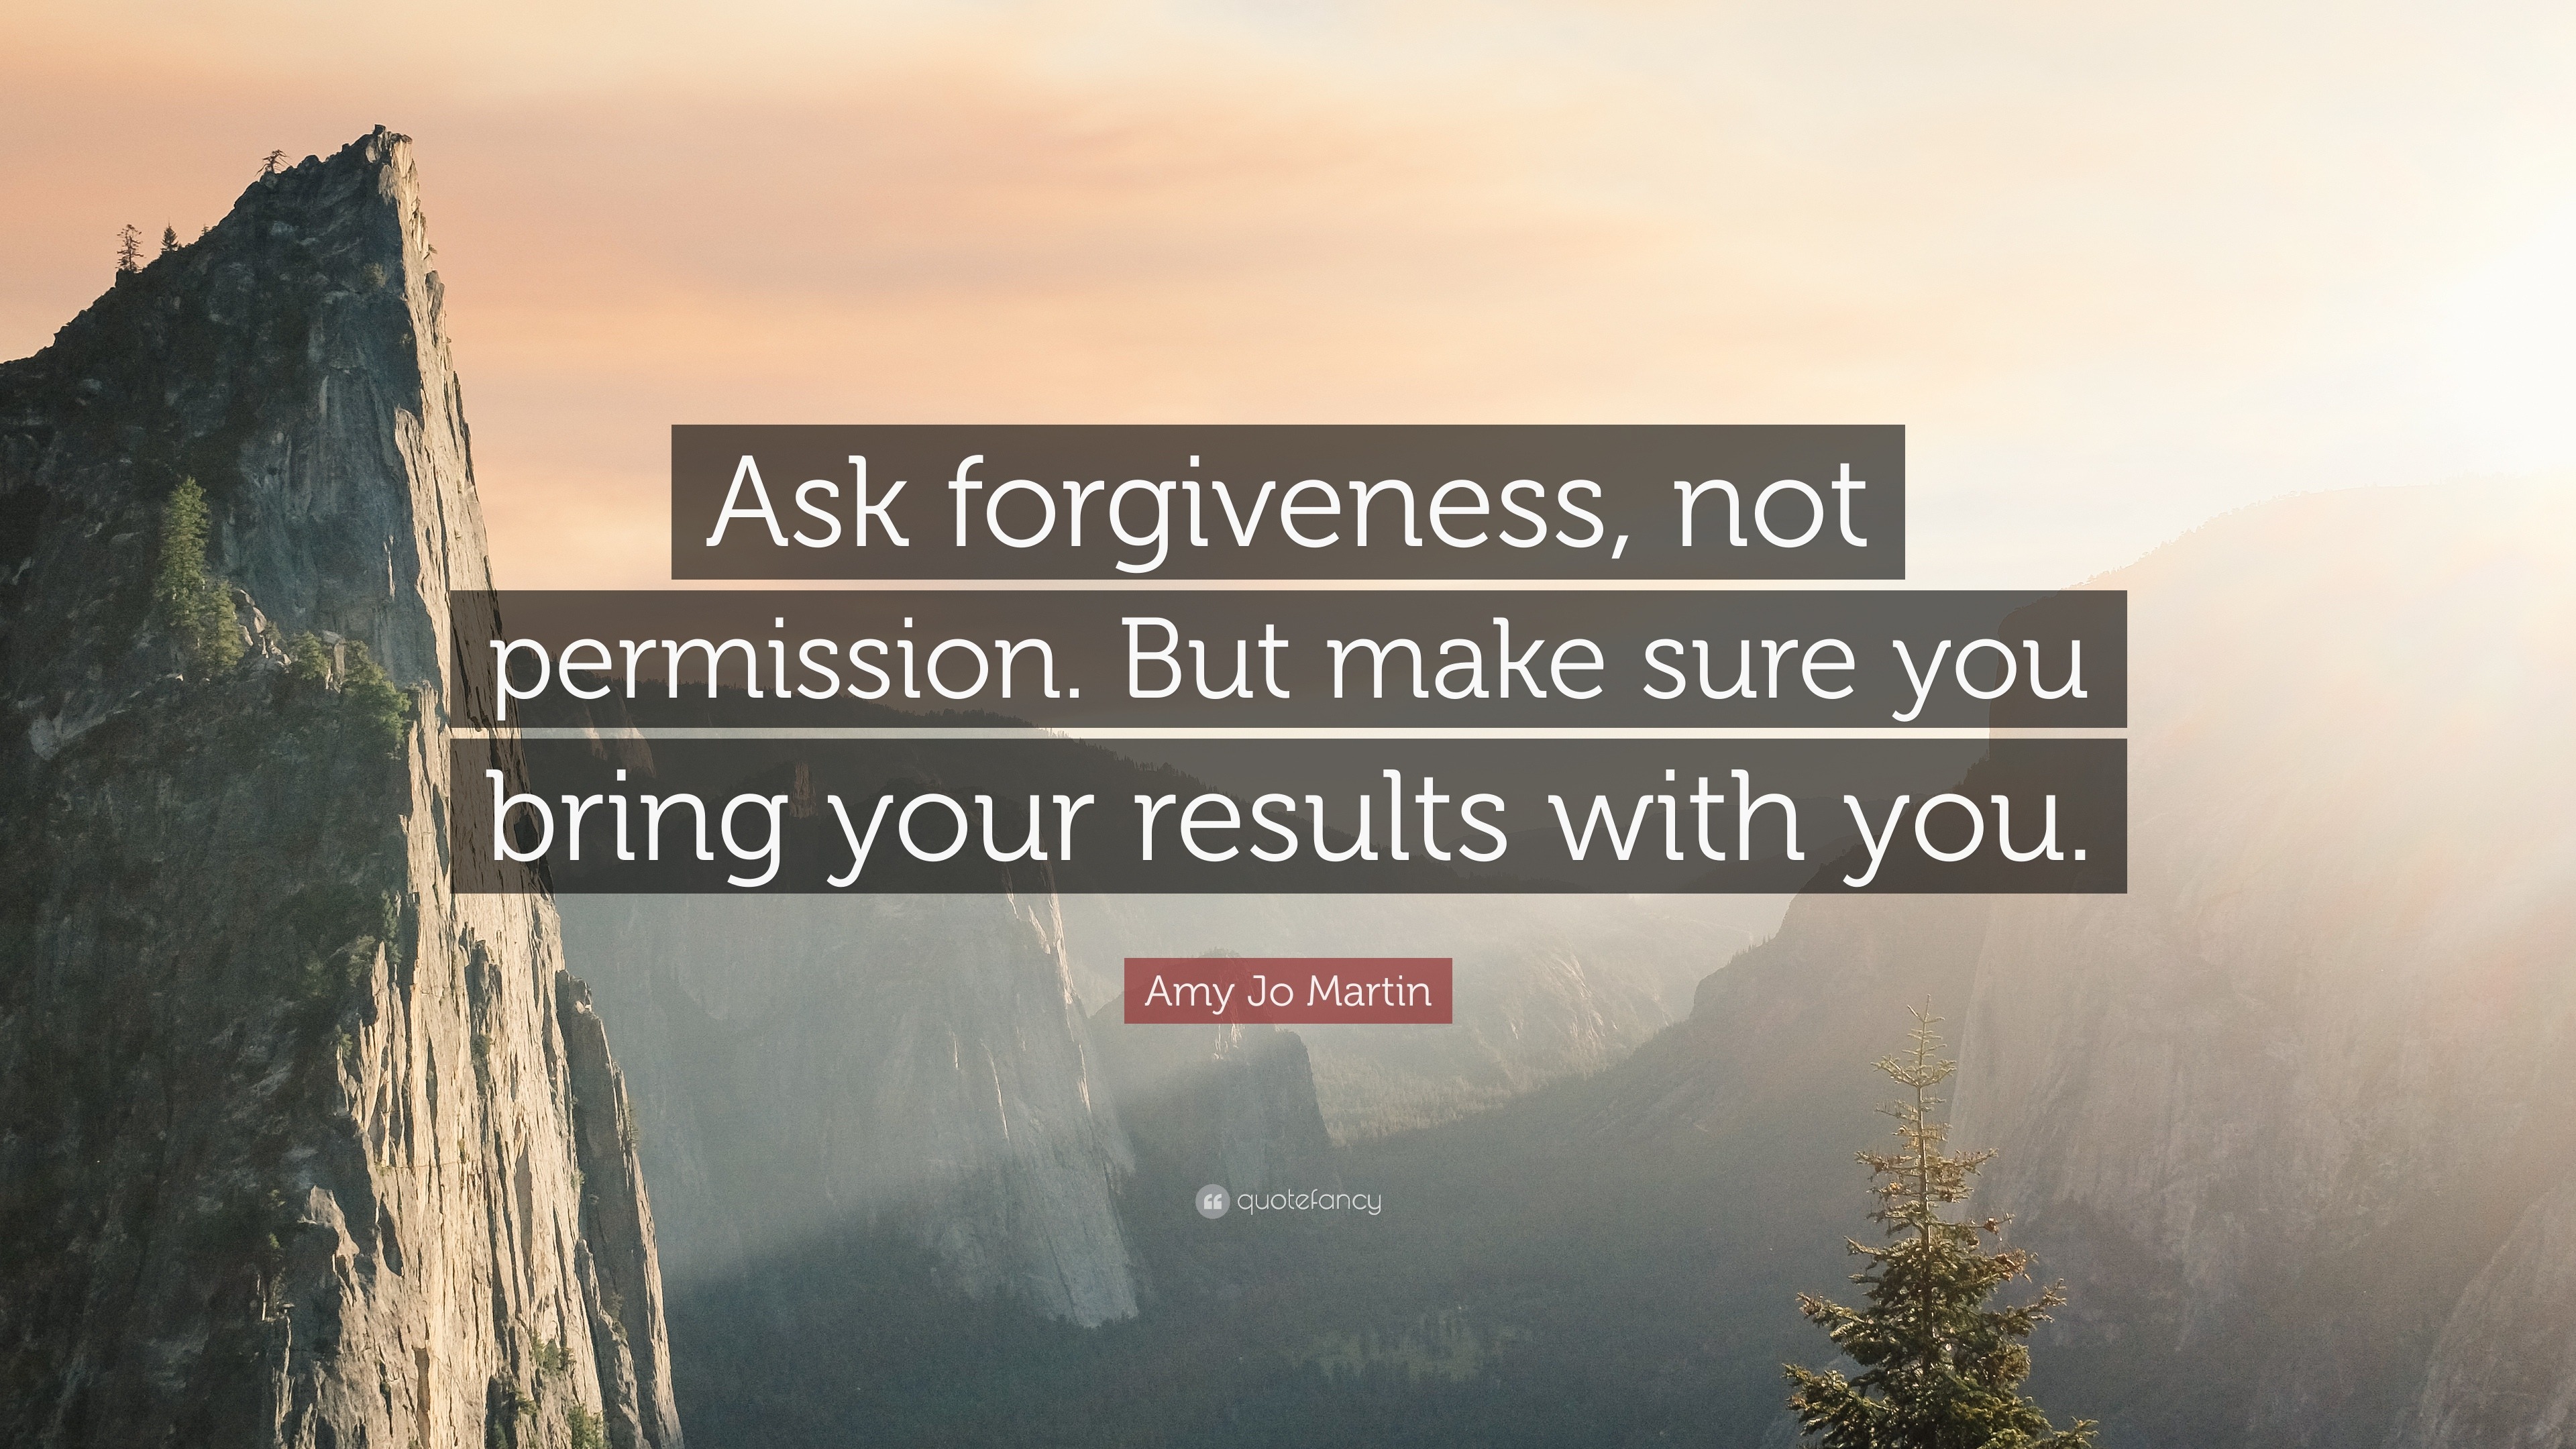 Amy Jo Martin Quote: “Ask forgiveness, not permission. But make sure